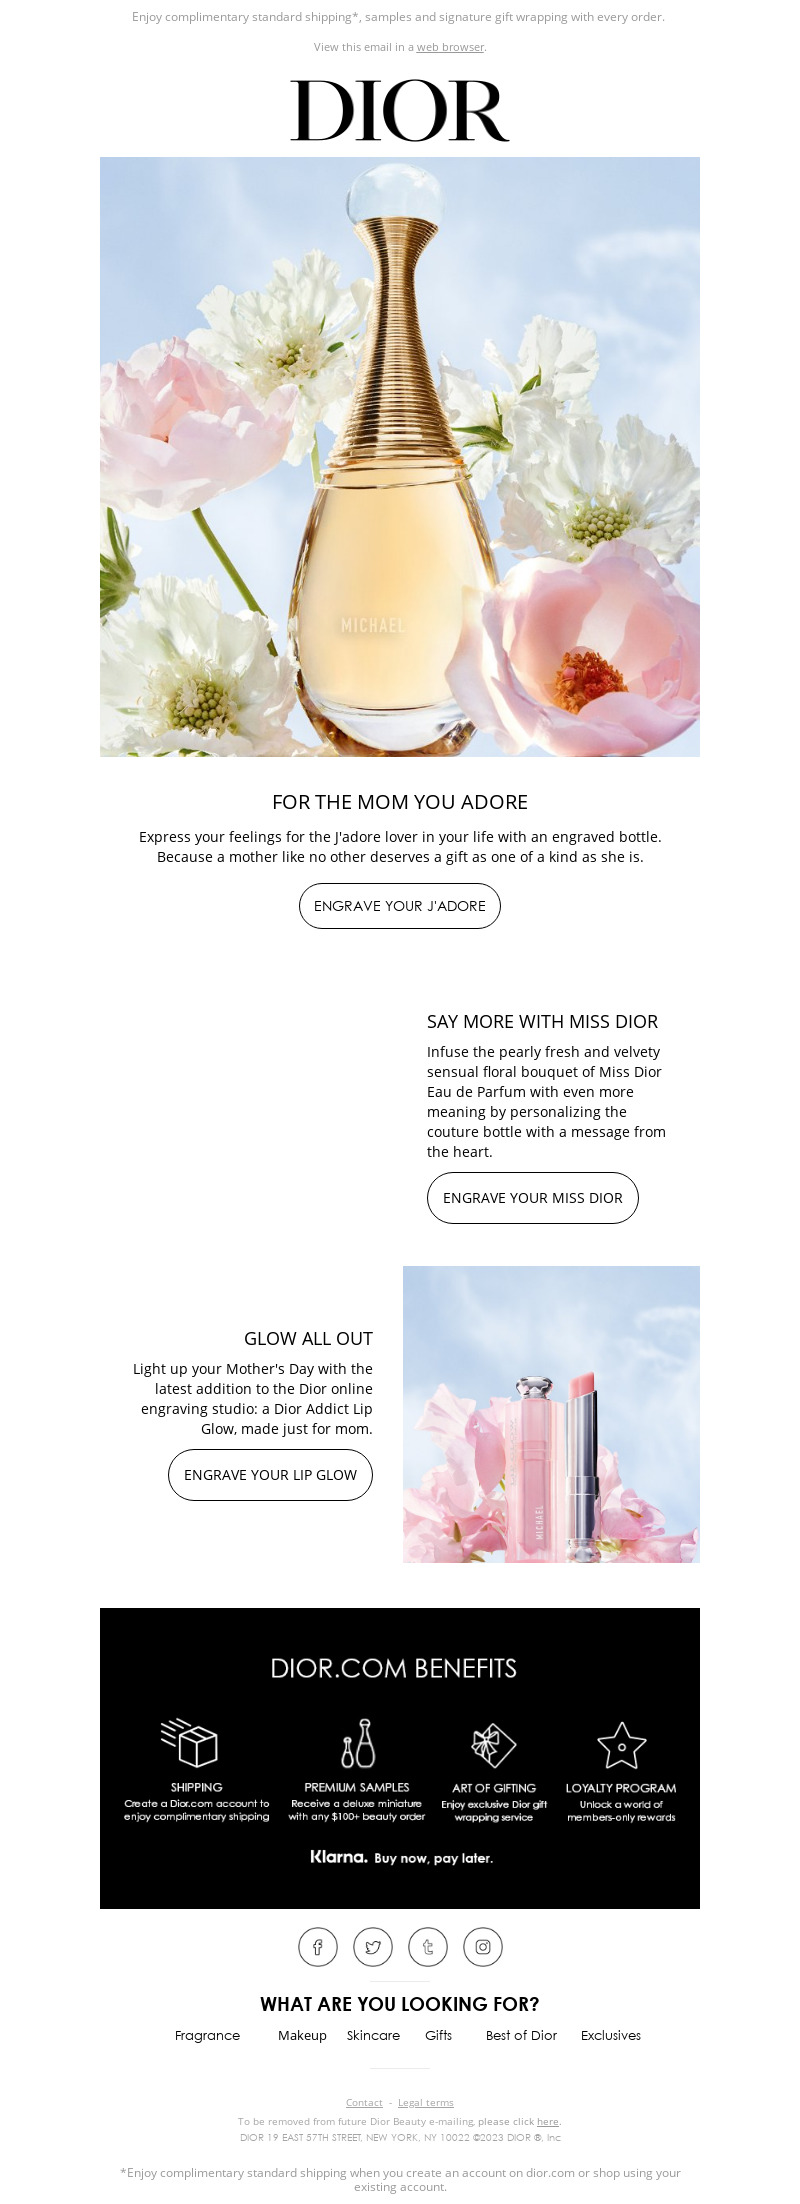 Dior Mother’s Day email showcasing engraved gifts, complimentary shipping, samples, and gift wrapping.